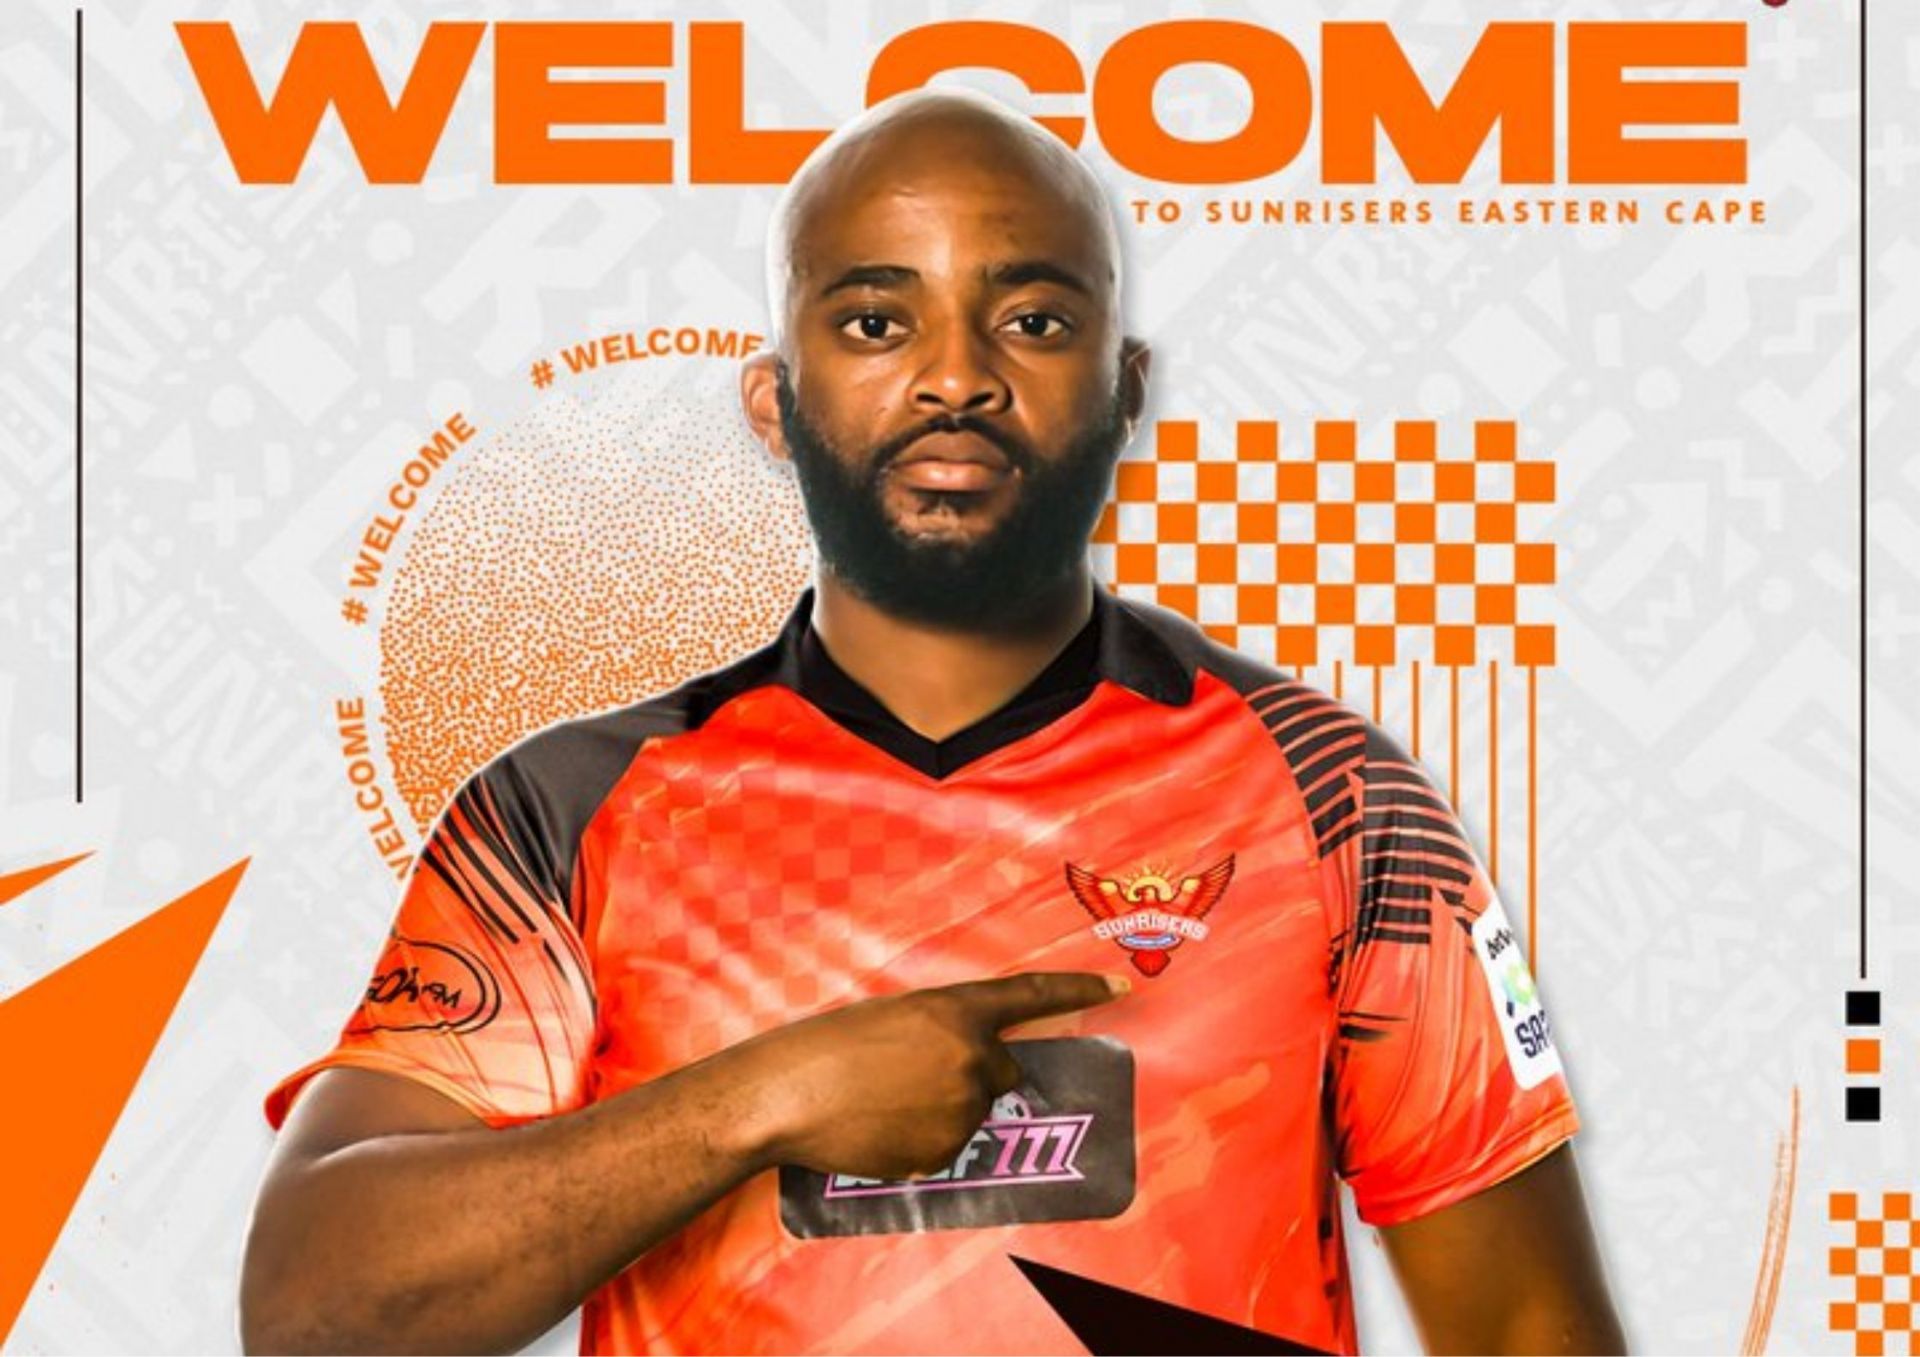 Temba Bavuma has received a new lease of life and could make his SA20 debut soon (Picture Credits: Twitter/ Sunrisers Eastern Cape).